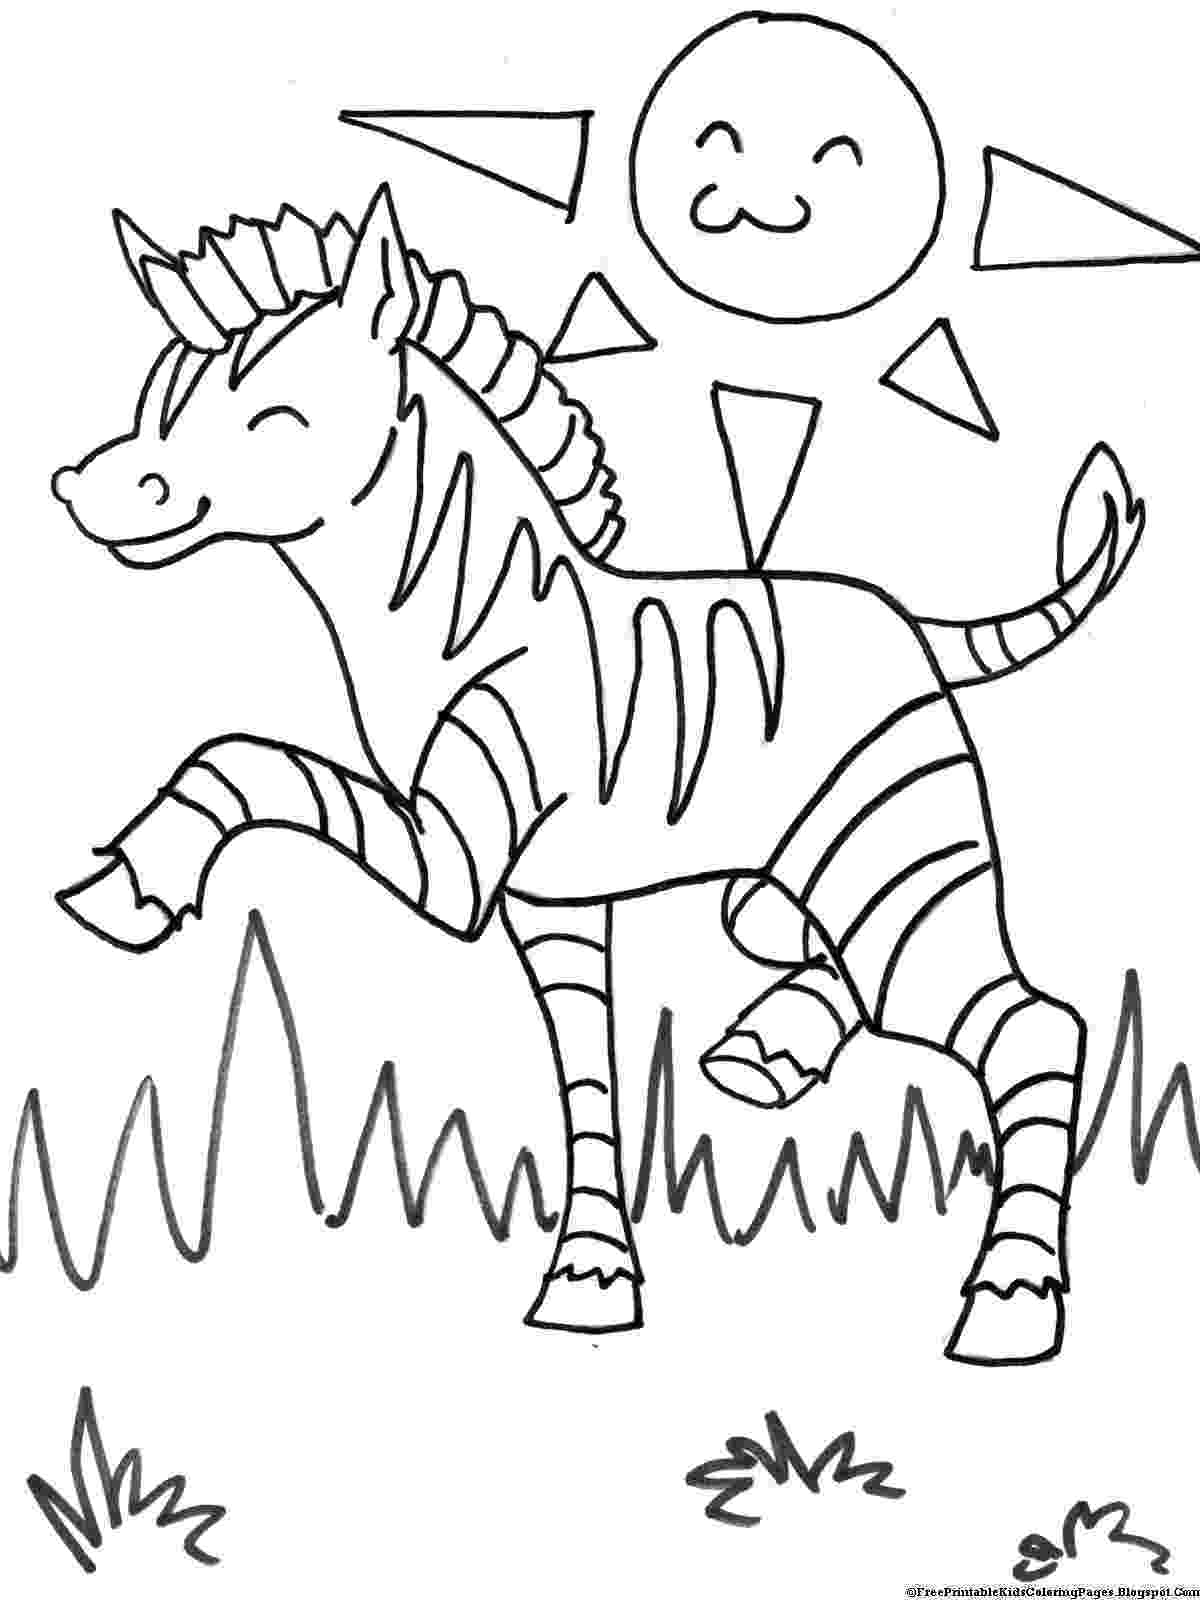 coloring pages of zebras zebra coloring pages free printable kids coloring pages of pages coloring zebras 